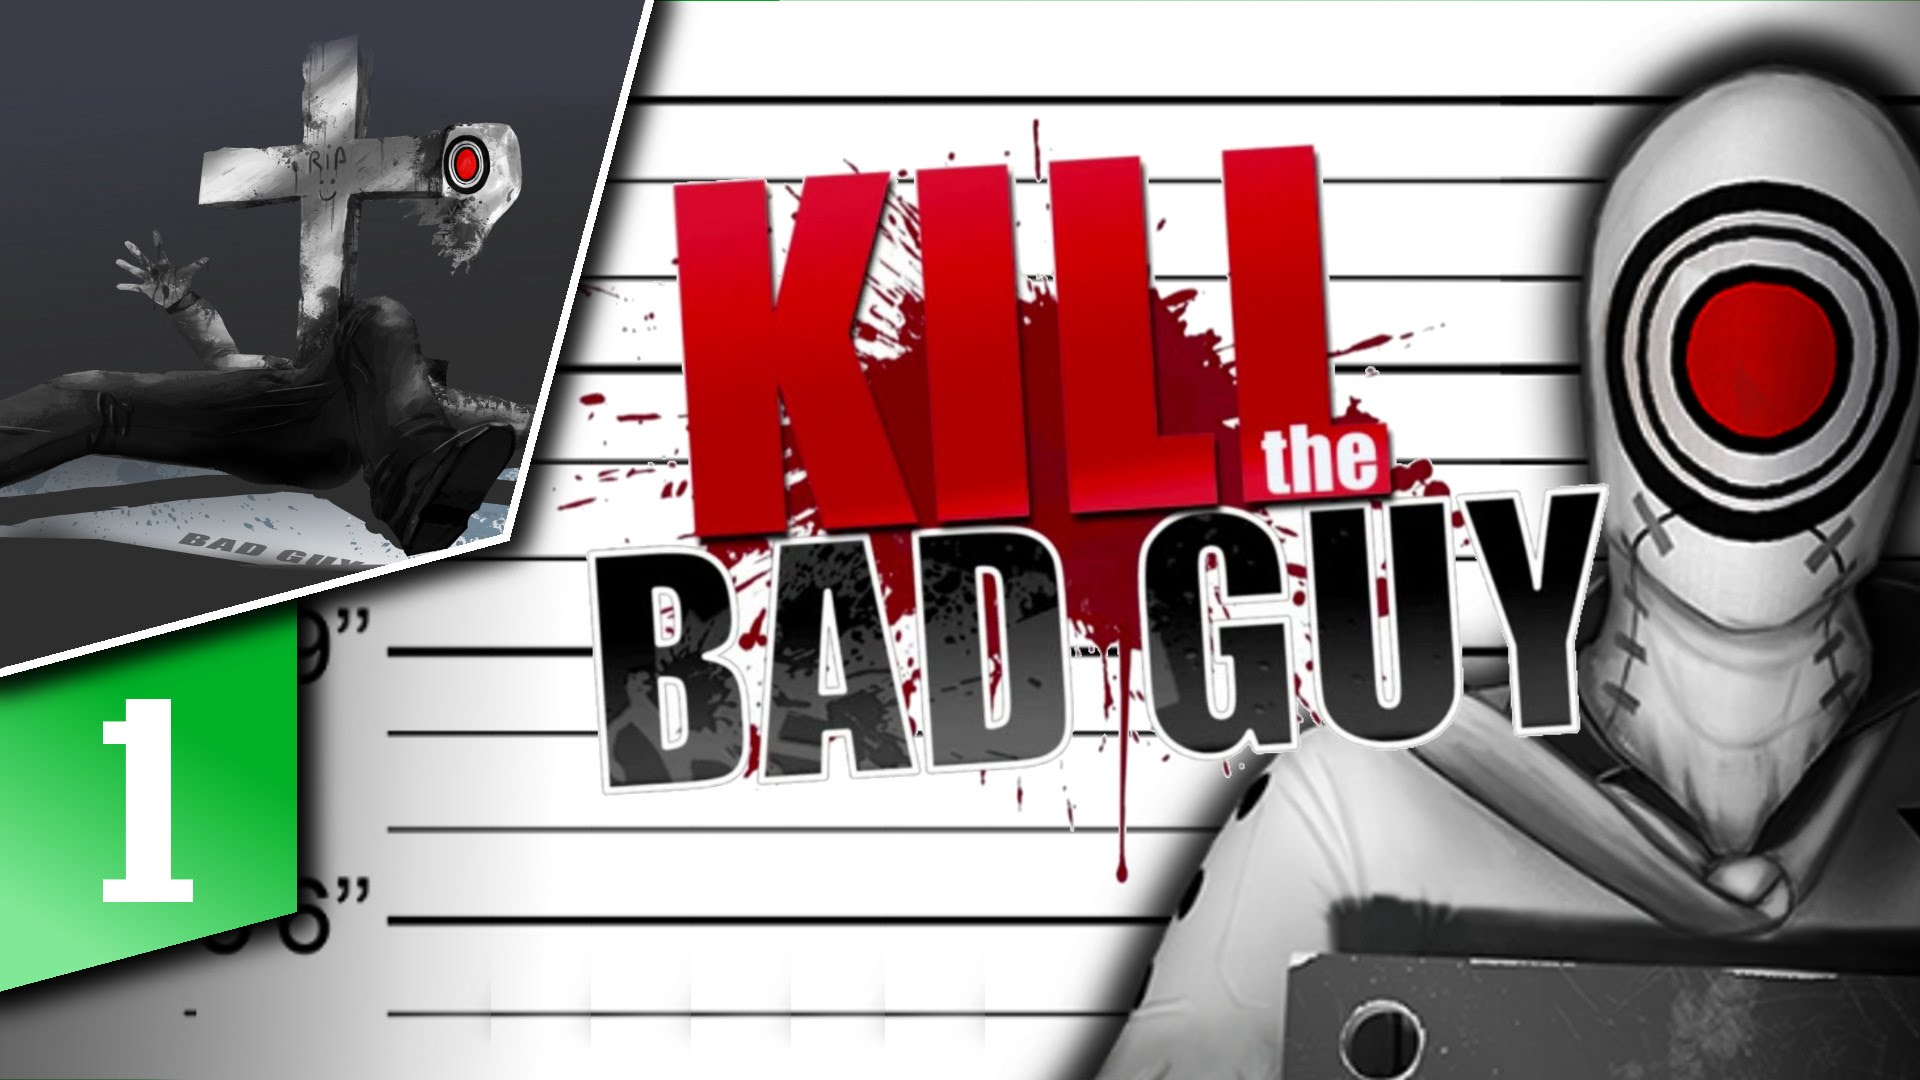 Kill The Bad Guy Backgrounds, Compatible - PC, Mobile, Gadgets| 1920x1080 px